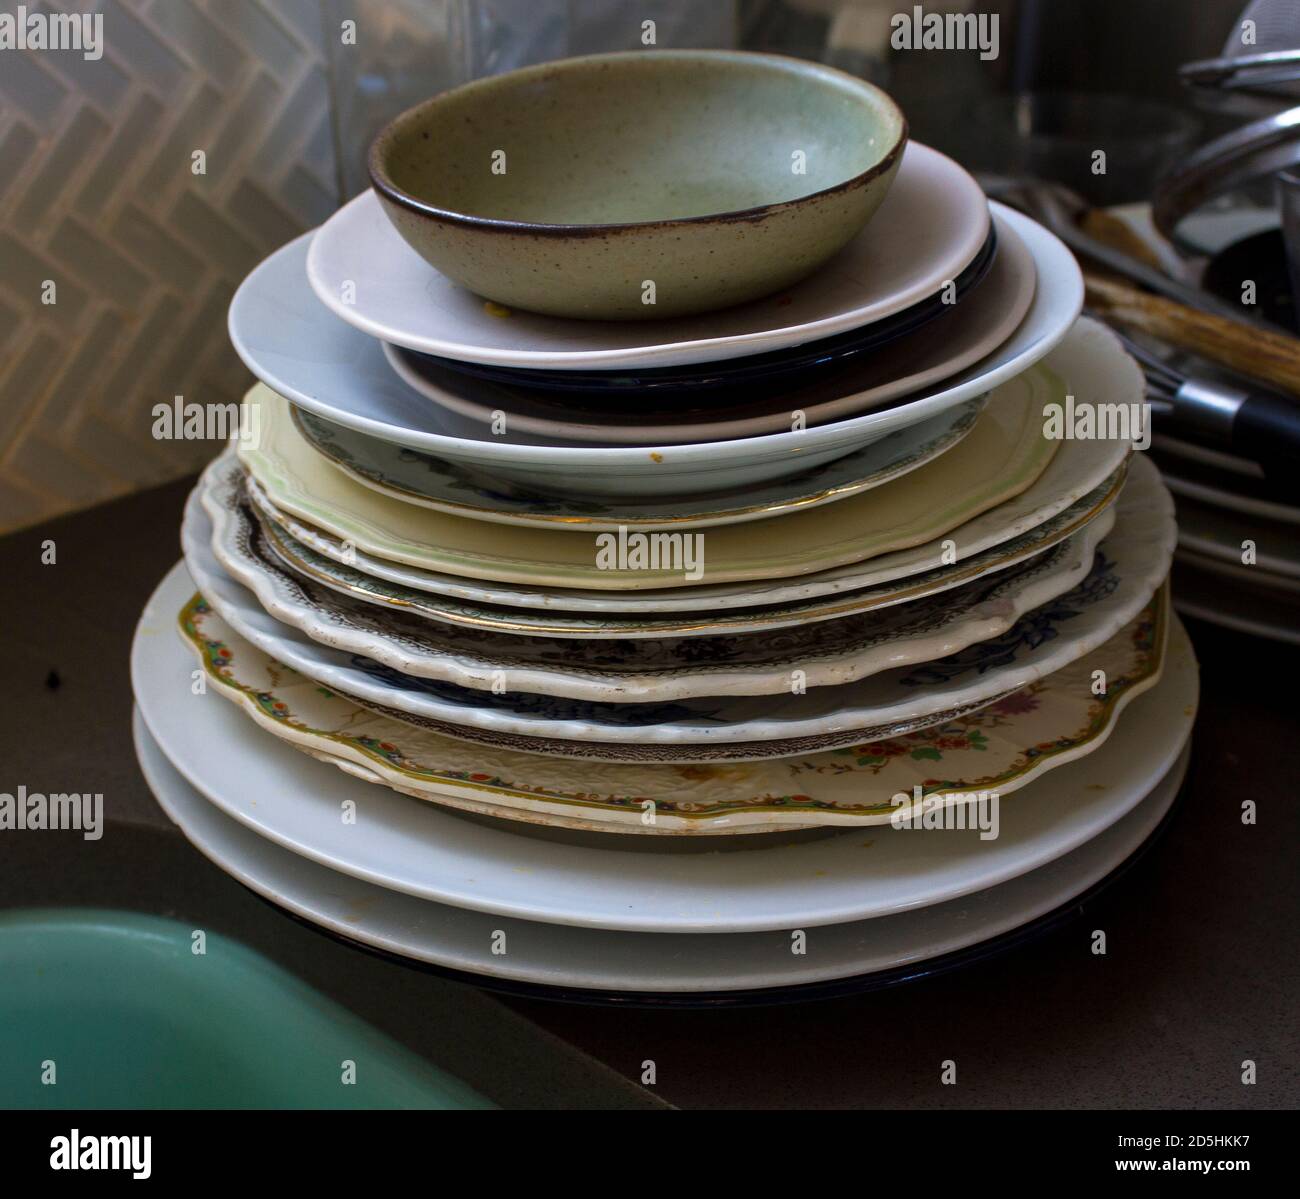 Dirty Dishes and Plates Stacked Stock Photo